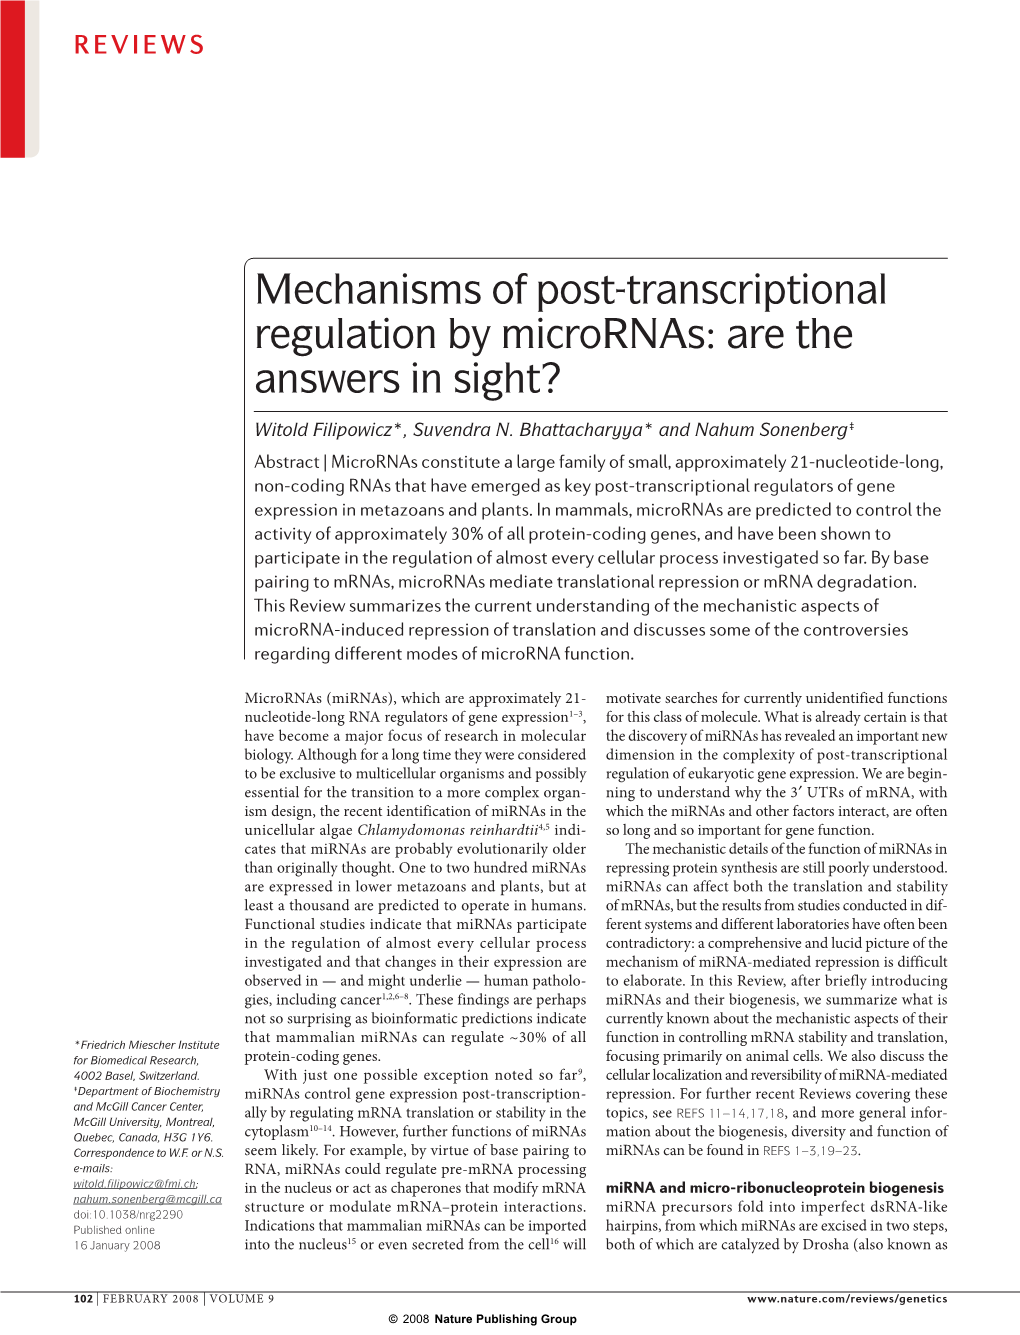 Mechanisms of Post-Transcriptional Regulation by Micrornas: Are the Answers in Sight?